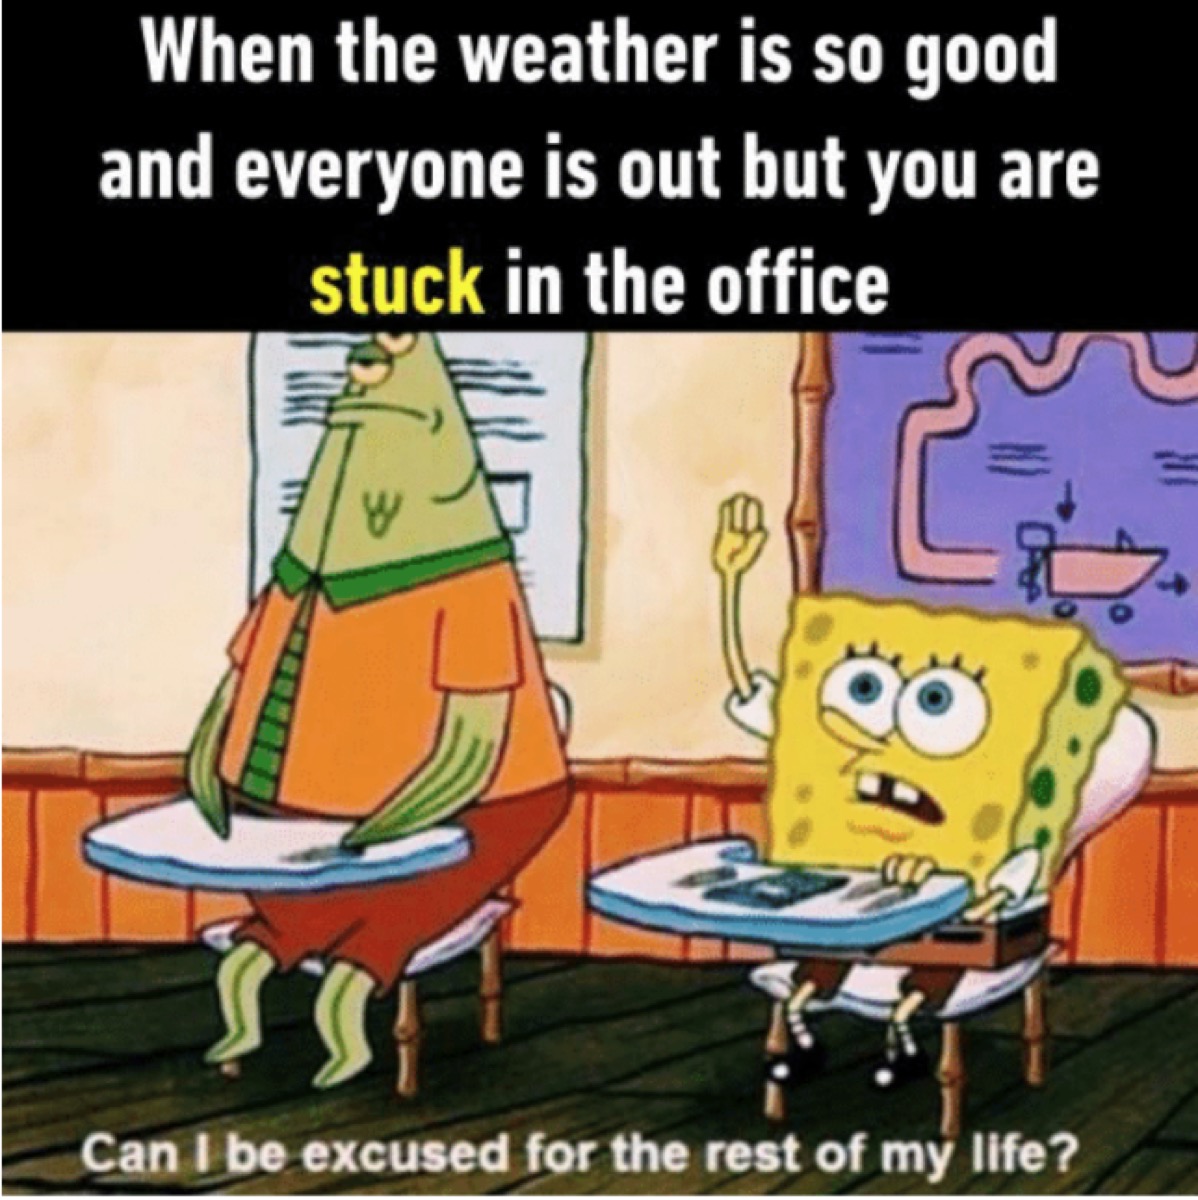 When the weather is so good and everyone is out but you are stuck in the office Can I be excused for the rest of my life?